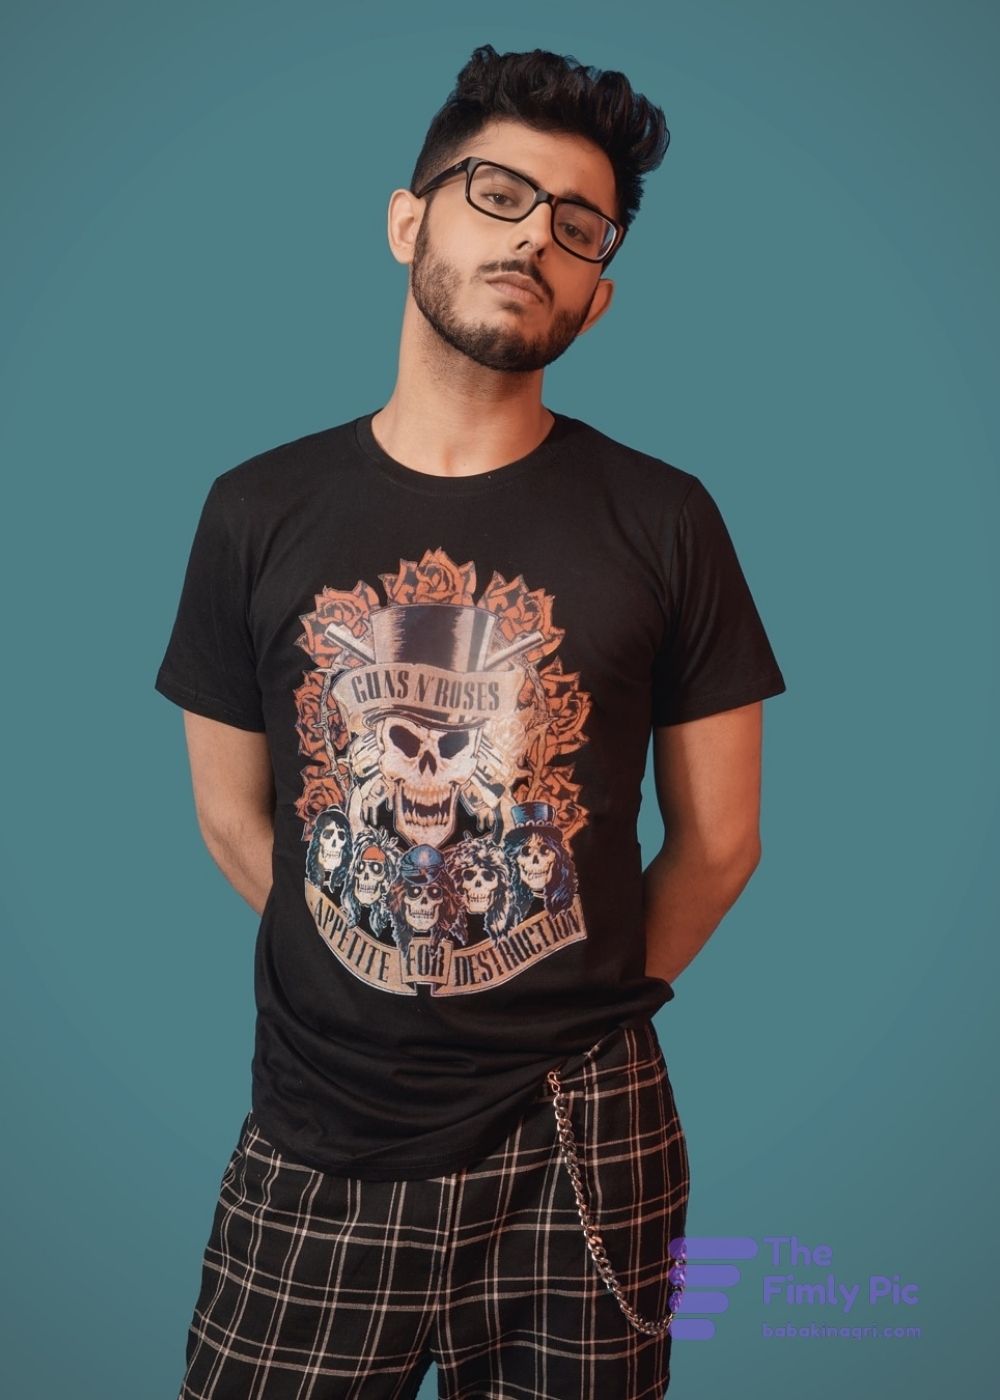 Latest Images of Carryminati